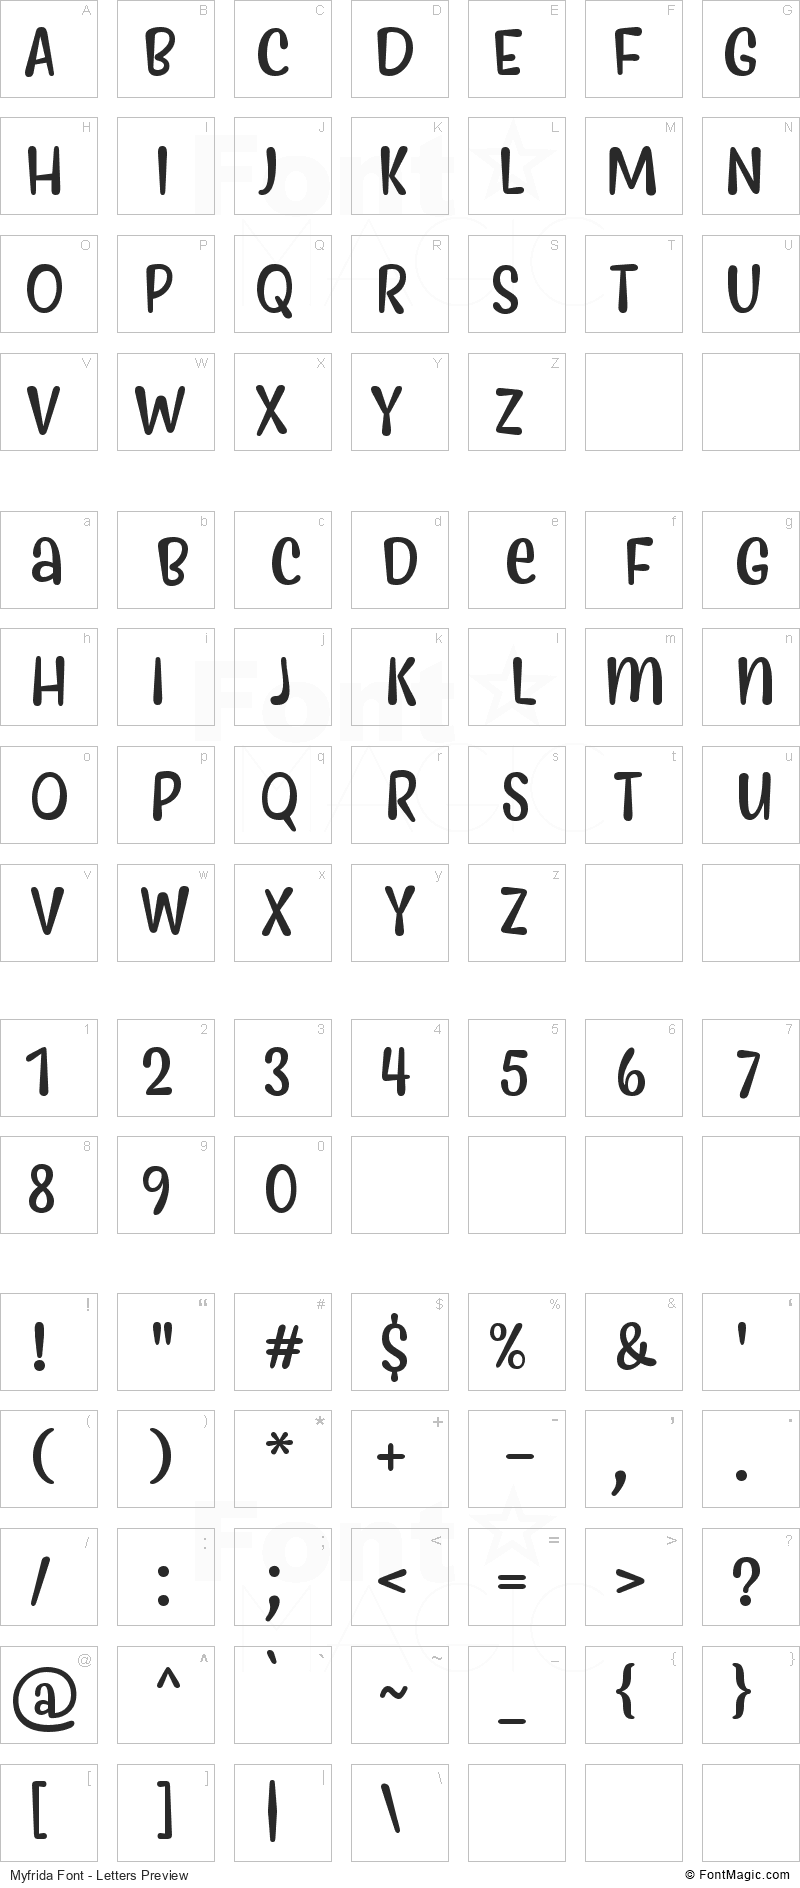 Myfrida Font - All Latters Preview Chart